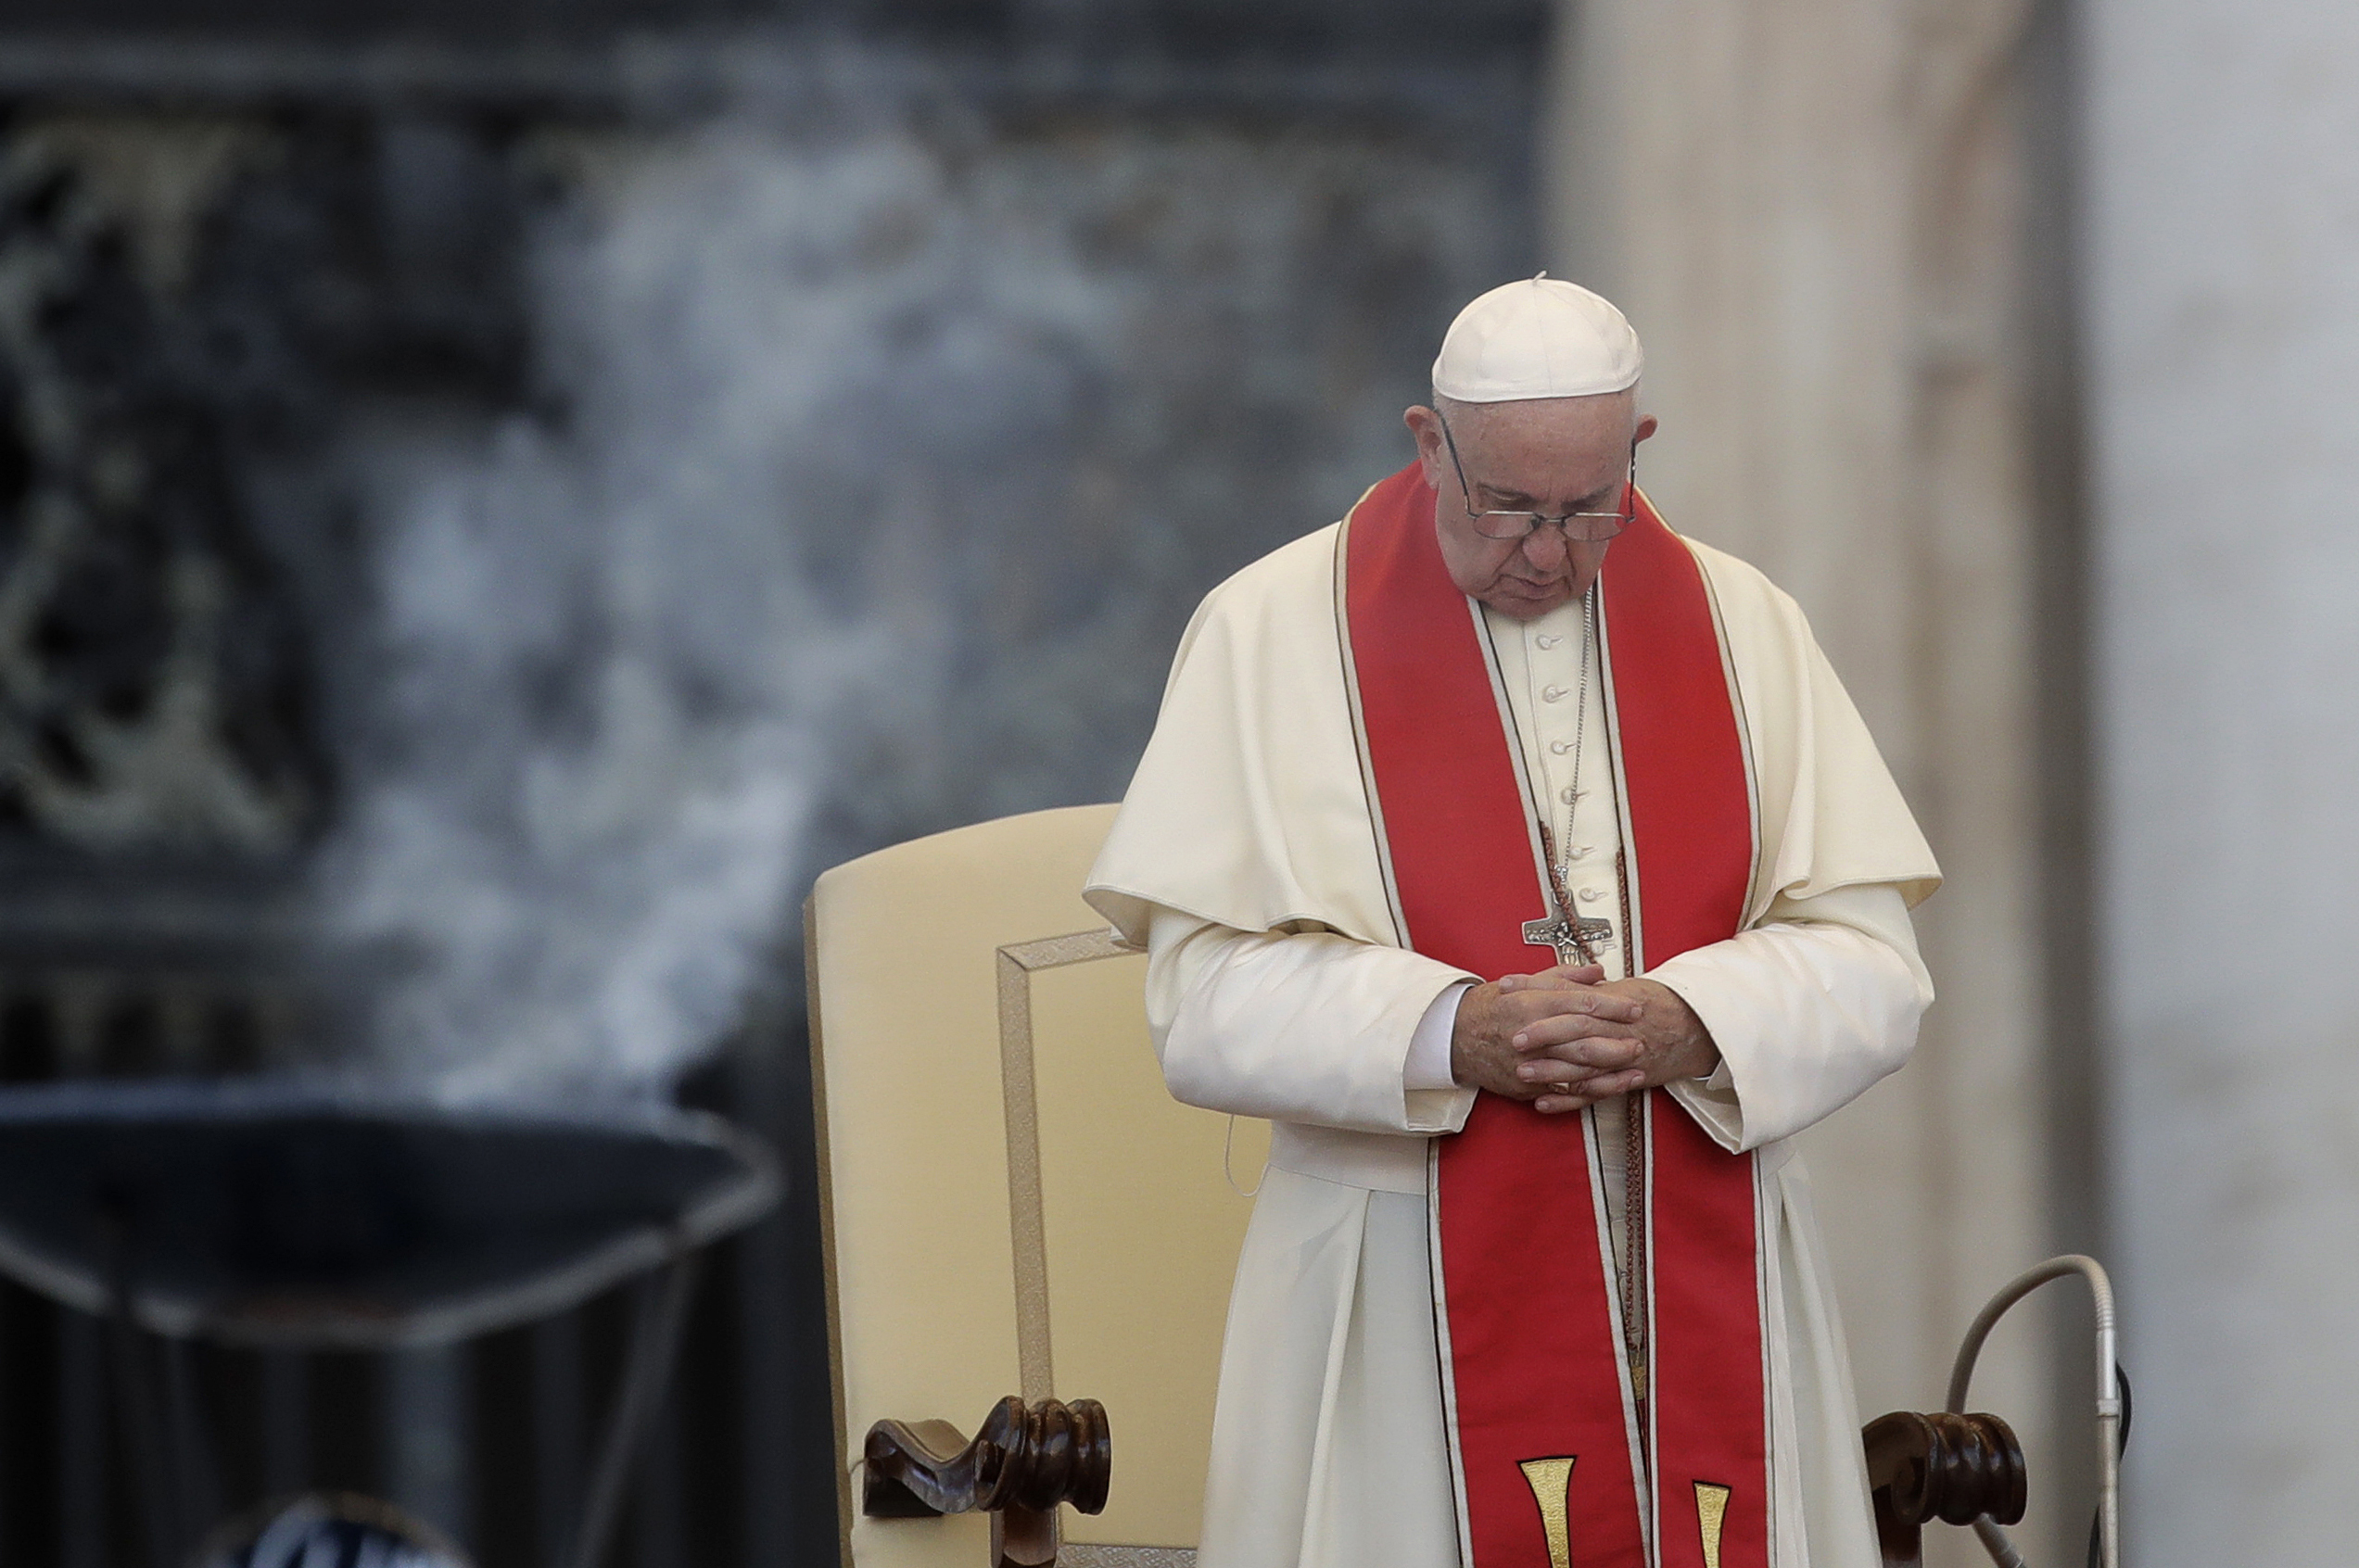 Pope Francis prays during an audience in St. Peter's square at the Vatican